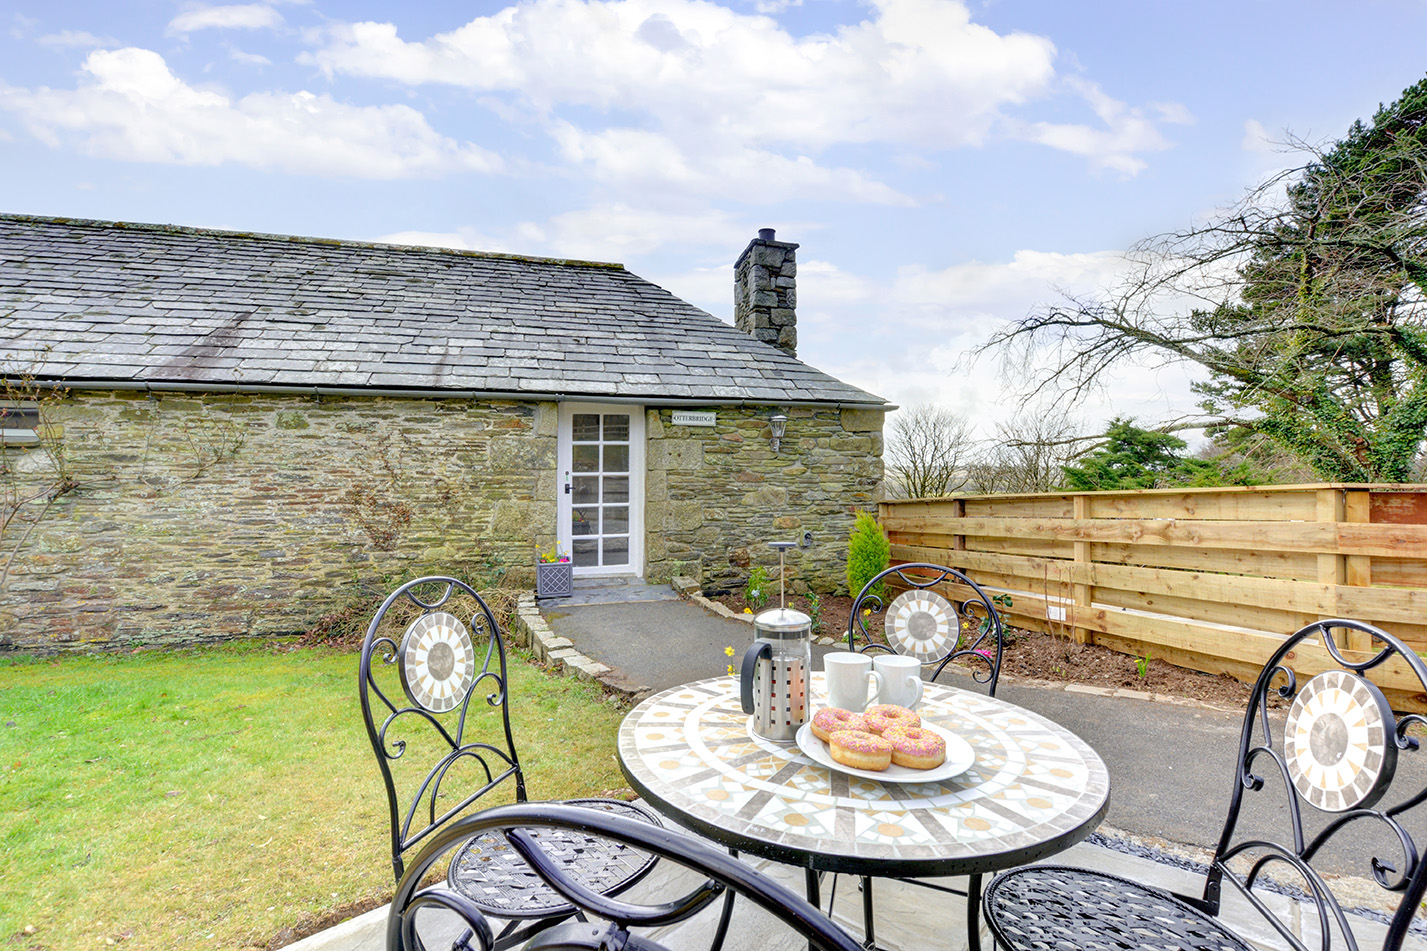 The patio and garden area outside of Otterbridge luxury self catering converted barn holiday cottage at Penrose Burden in North Cornwall.jpg